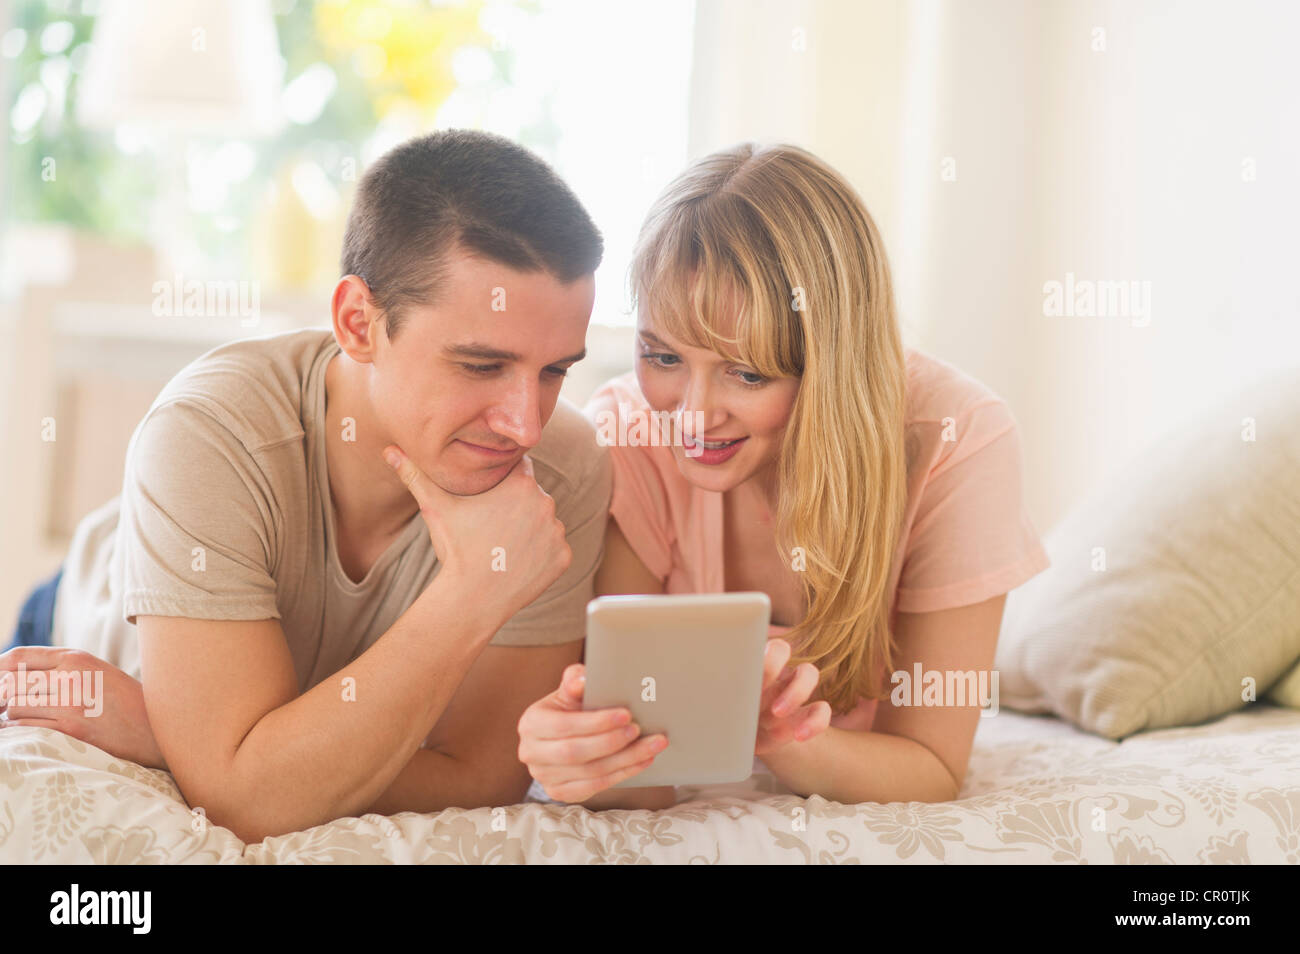 USA, New Jersey, Jersey City, Couple lying on bed and using digital tablet Banque D'Images